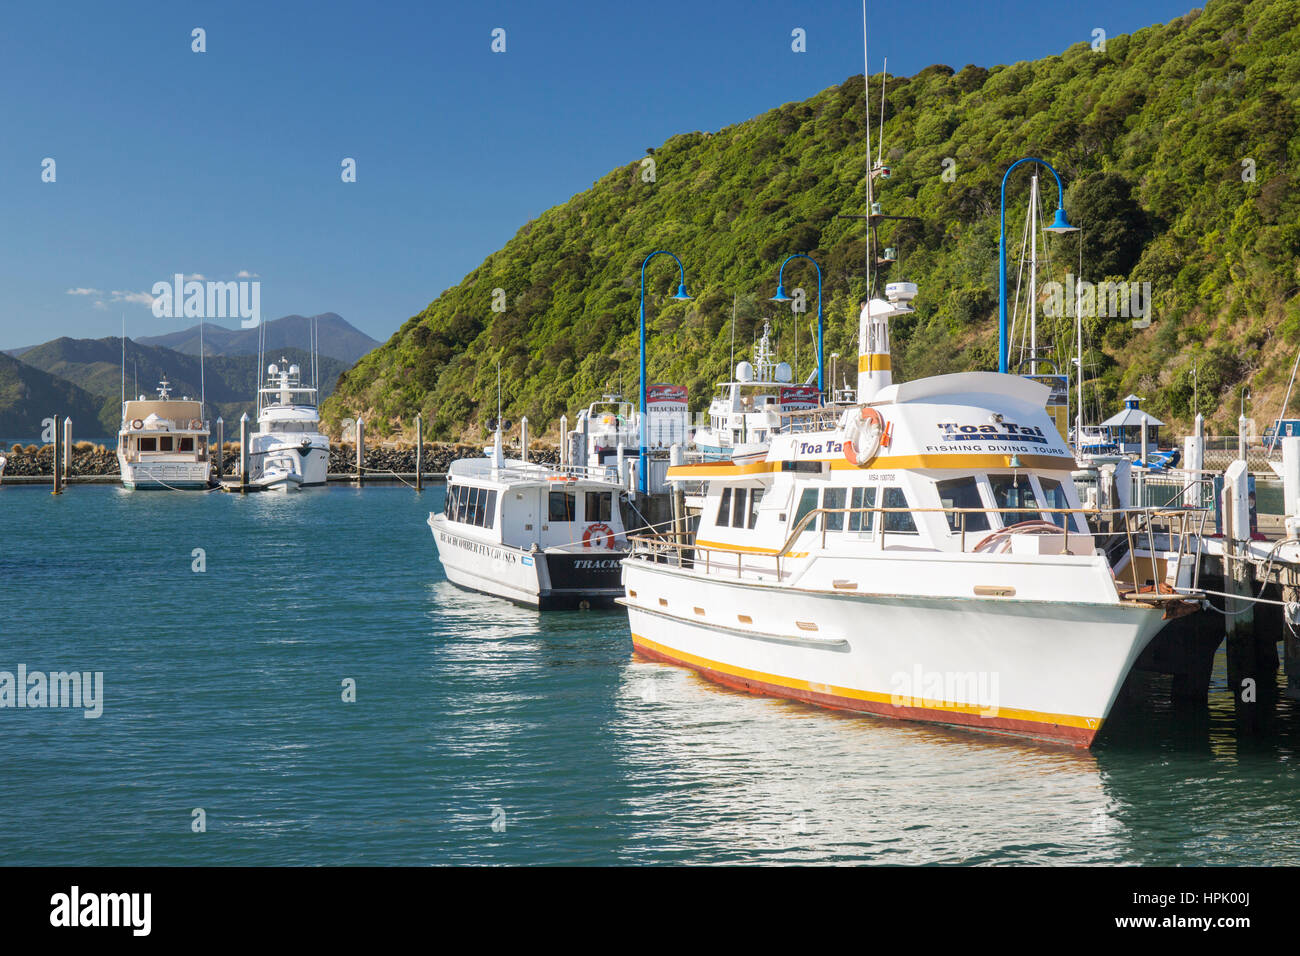 Picton, Marlborough, New Zealand. Boats moored alongside wooden jetty, Picton Harbour. Stock Photo